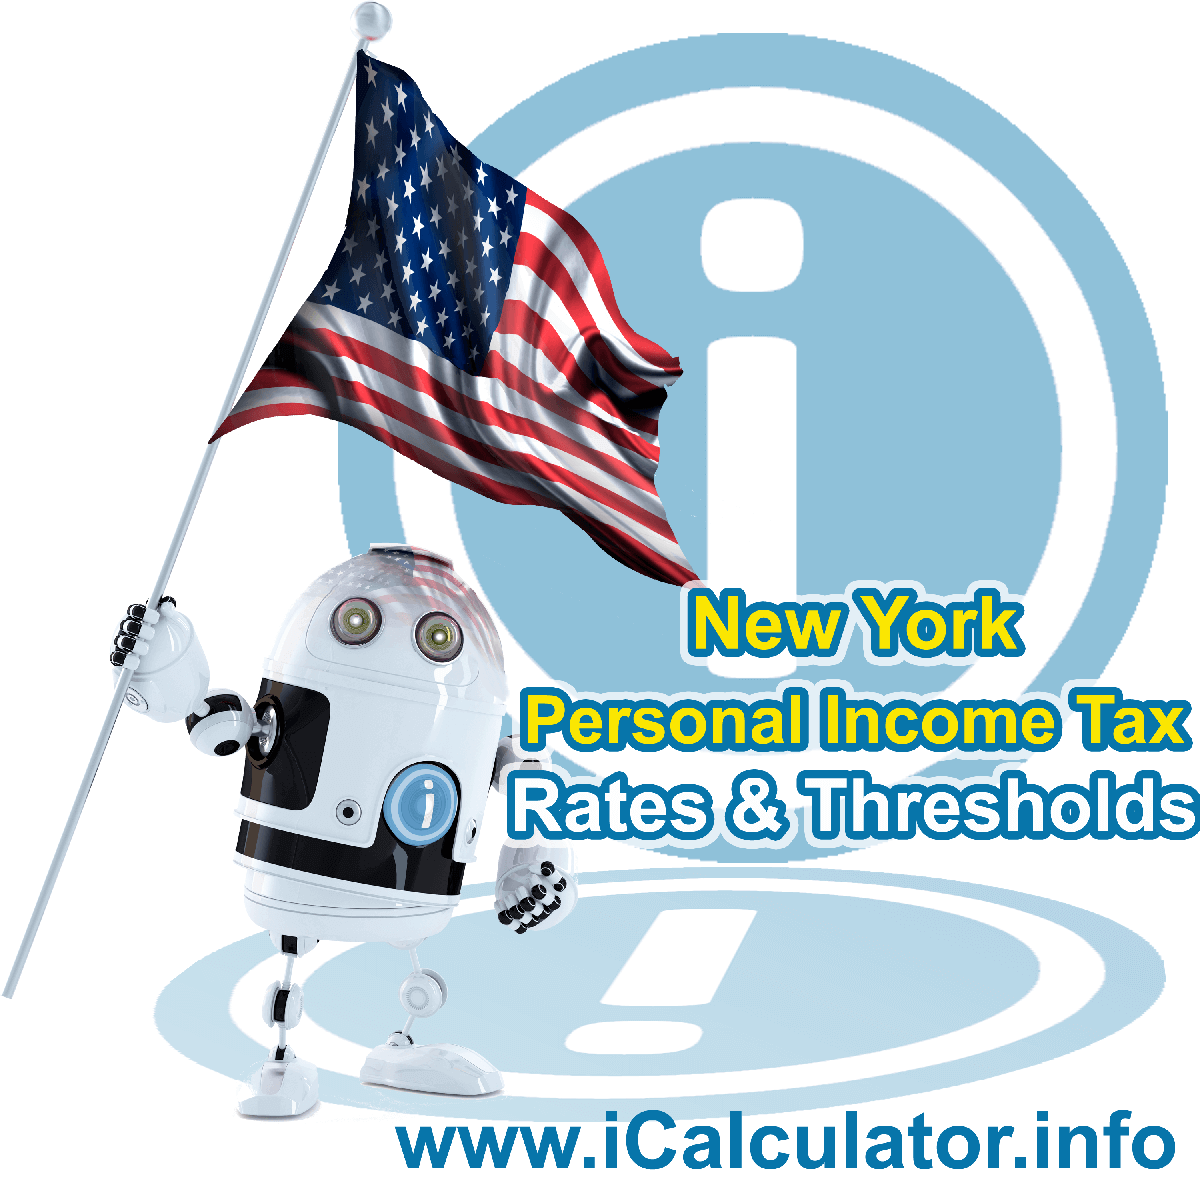 New York State Tax Tables 2018. This image displays details of the New York State Tax Tables for the 2018 tax return year which is provided in support of the 2018 US Tax Calculator